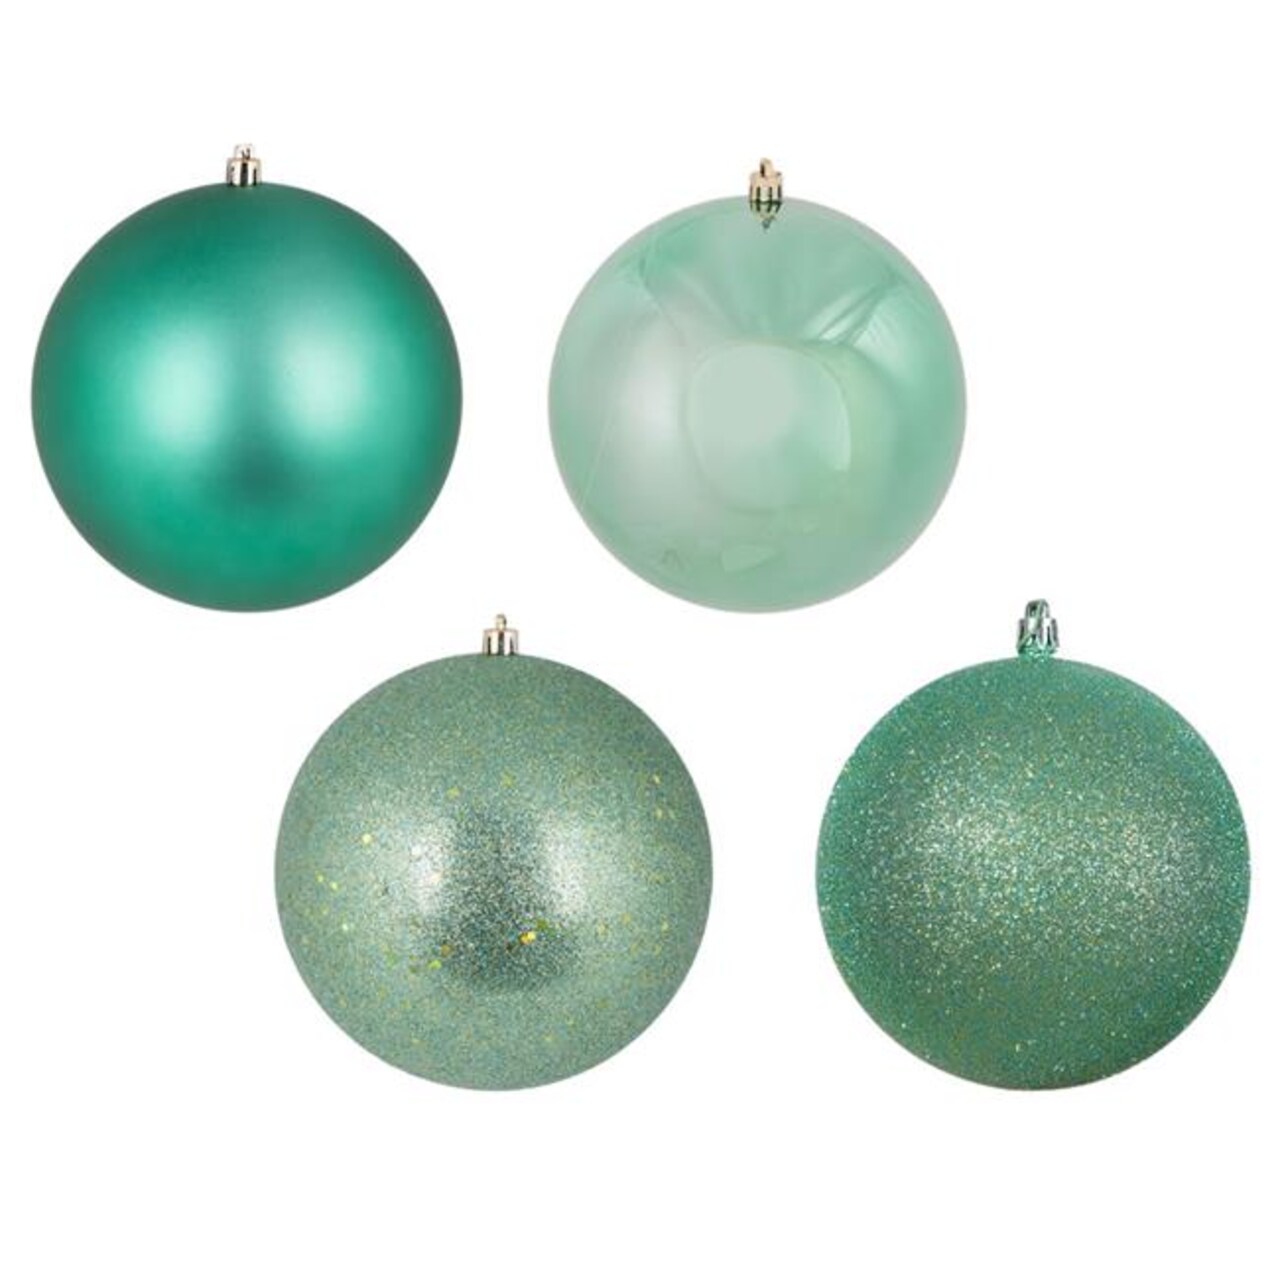 1 in. Seafoam Assorted Ball Ornament 2 Boxes of 18